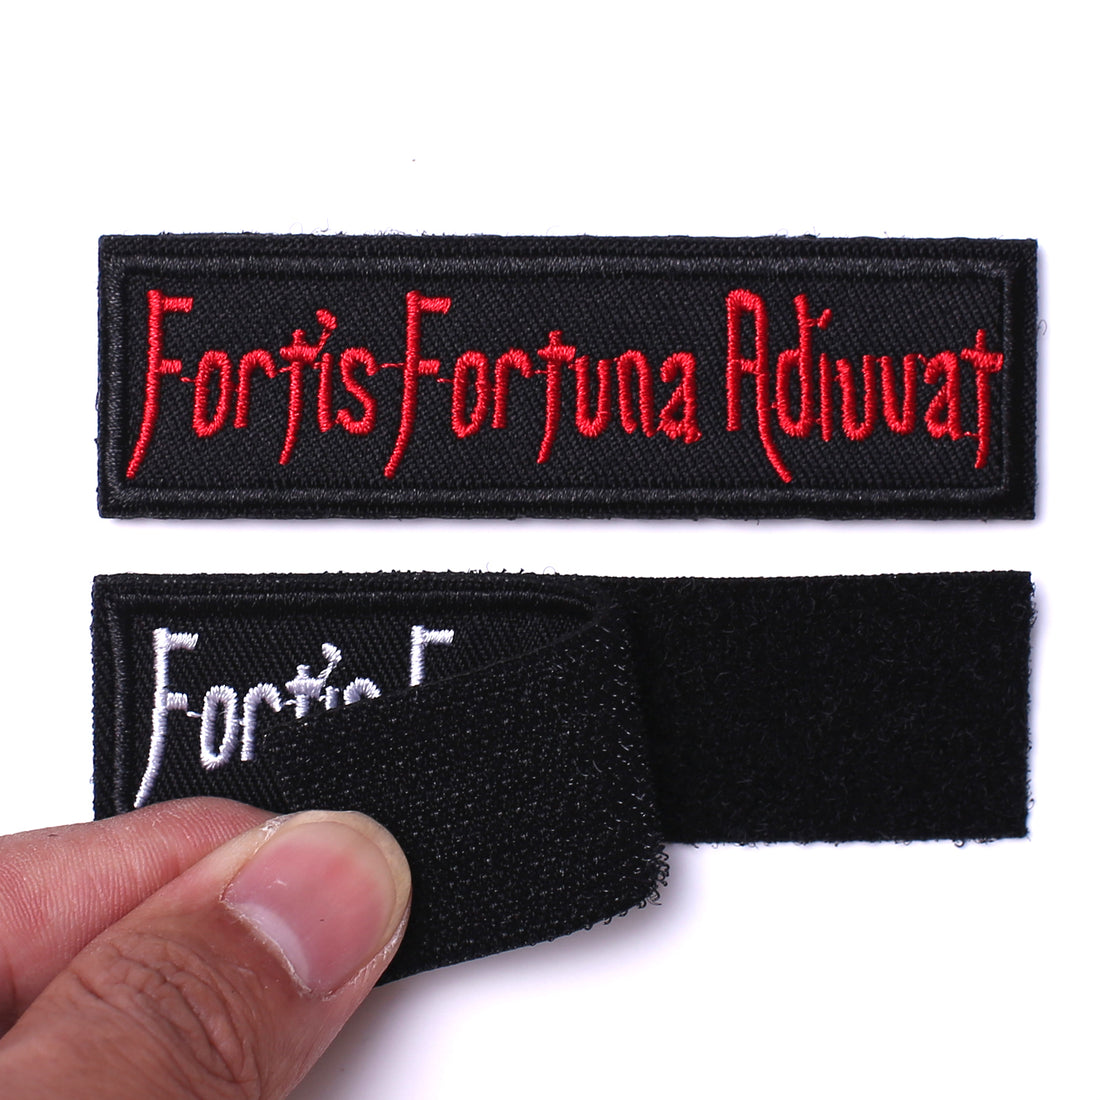 2 Pieces Fortis Fortuna Tactical Patch